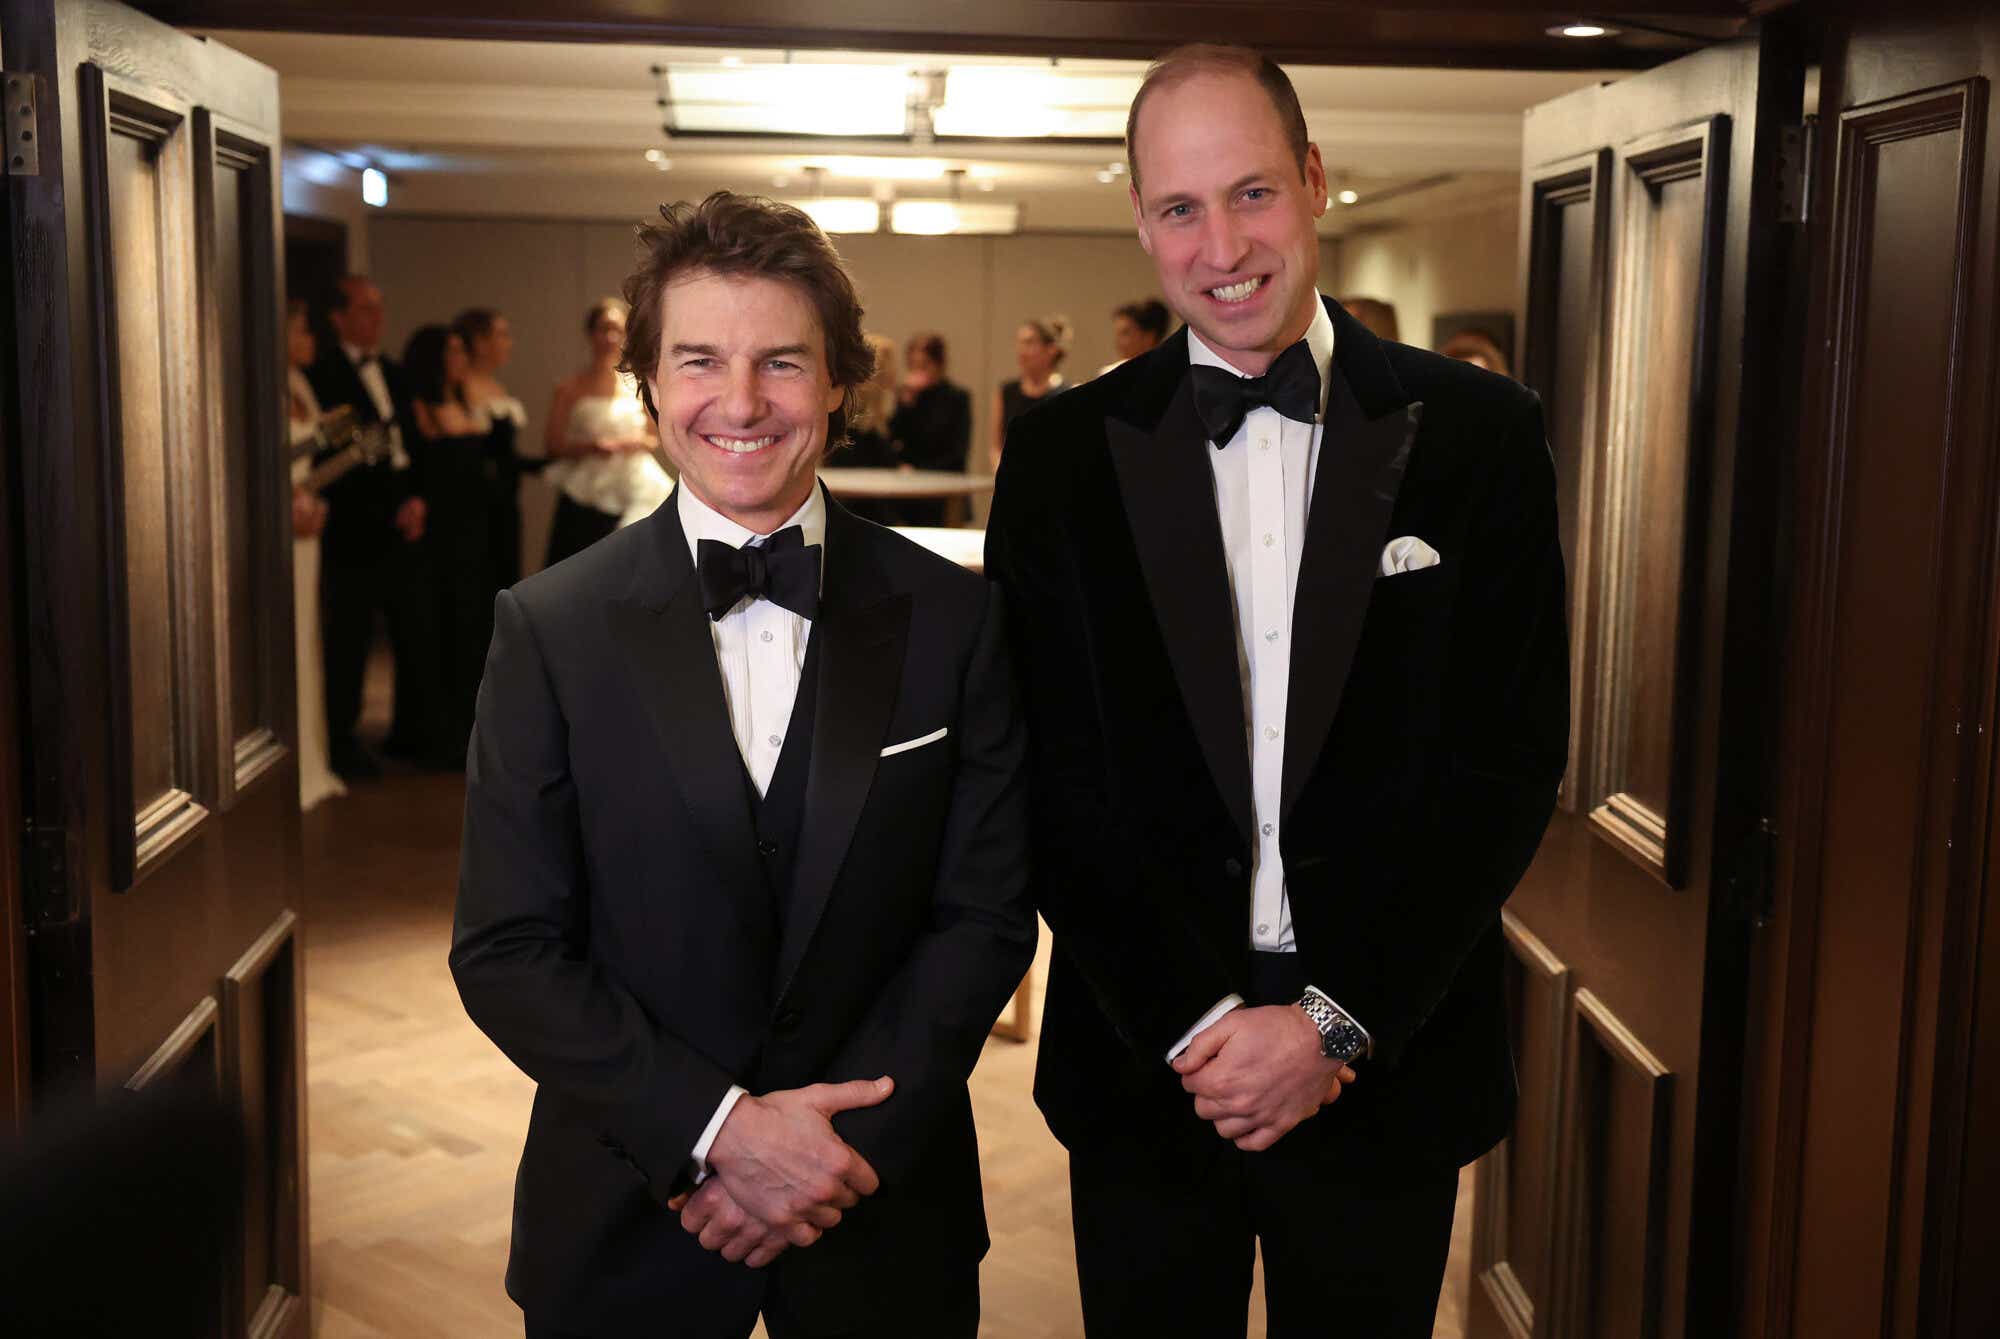 Tom Cruise and Prince William wear tuxes and pose for a photo.